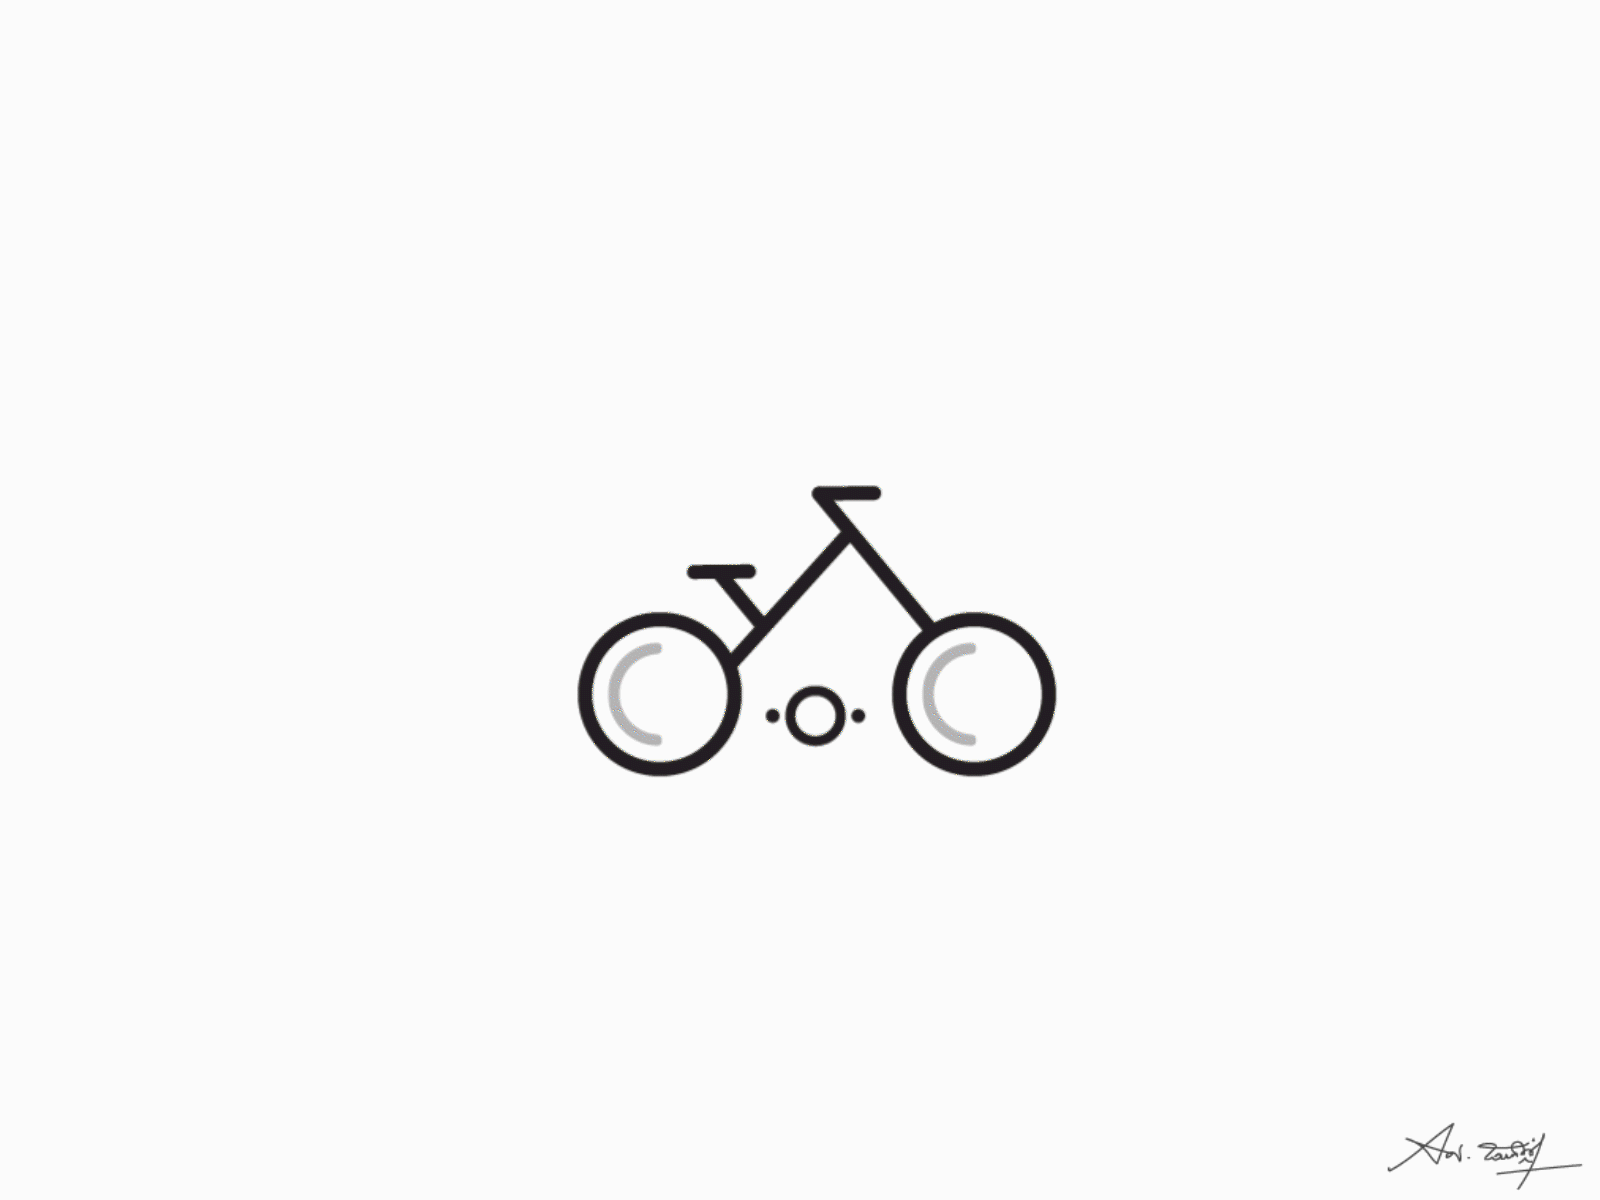 Bicycle loader animation animation art bicycle bicycle app cycle design designthursday illustration illustrator interaction interaction design interactions minimalism mobile mobile app design nmwdesign sabartism ui vector website